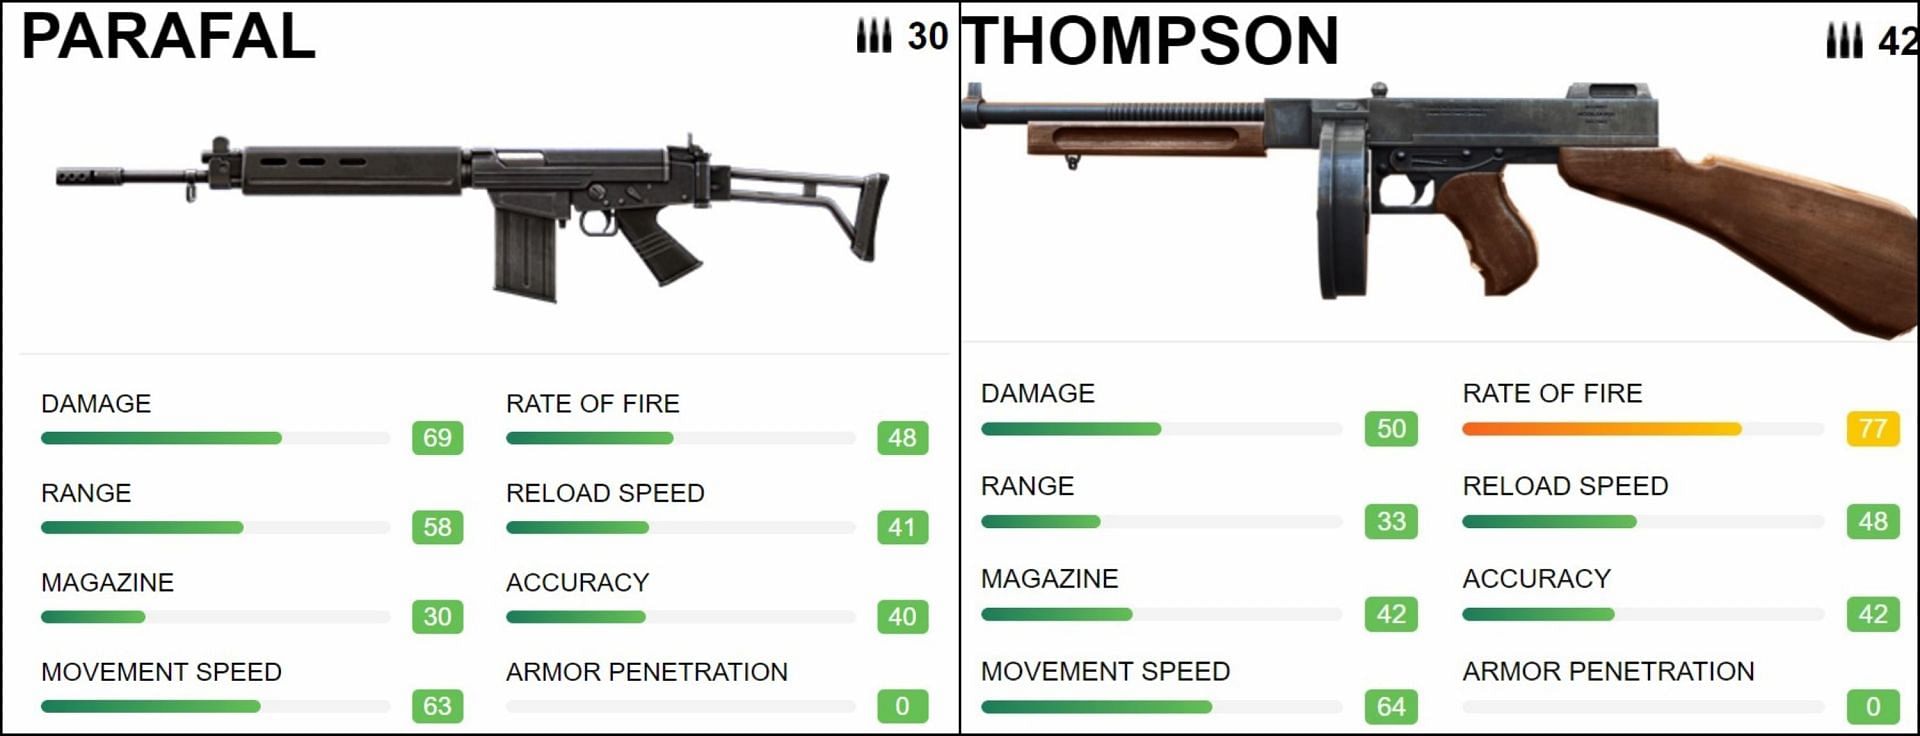 Parafal and Thompson stats (Image via Free Fire)